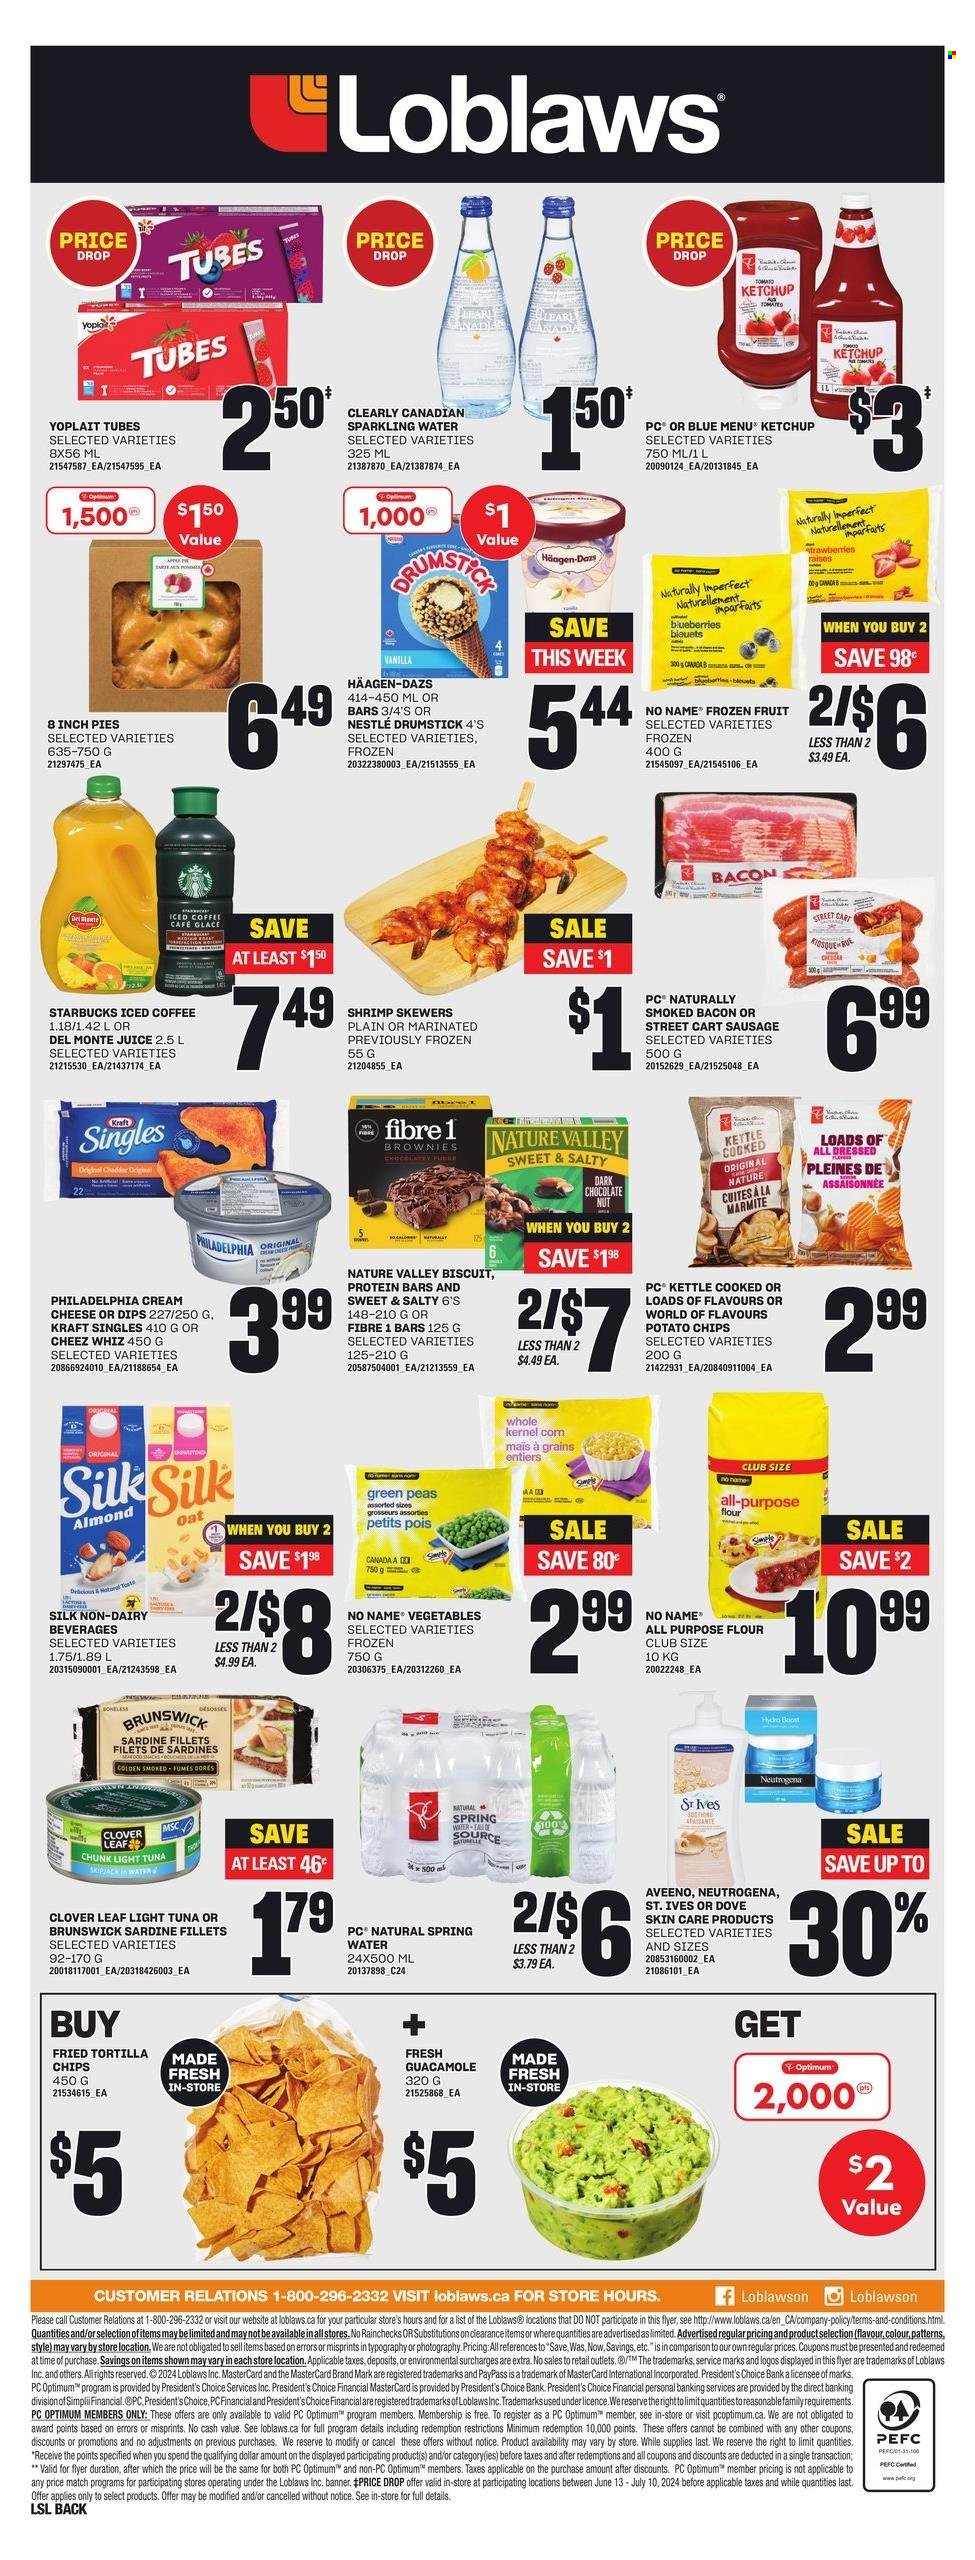 thumbnail - Loblaws Flyer - June 27, 2024 - July 03, 2024 - Sales products - buns, cucumber, watermelon, peaches, cod, fish fillets, salmon, salmon fillet, scallops, haddock, seafood, shrimps, shrimp skewers, pizza, chicken breasts, Activia, ice cream, tortilla chips, potato chips, Lay’s, salty snack, Canada Dry, Coca-Cola, ginger ale, Pepsi, soft drink, carbonated soft drink, ground chicken, chicken, steak, ribs, pork meat, pork ribs, pork back ribs, probiotics. Page 2.